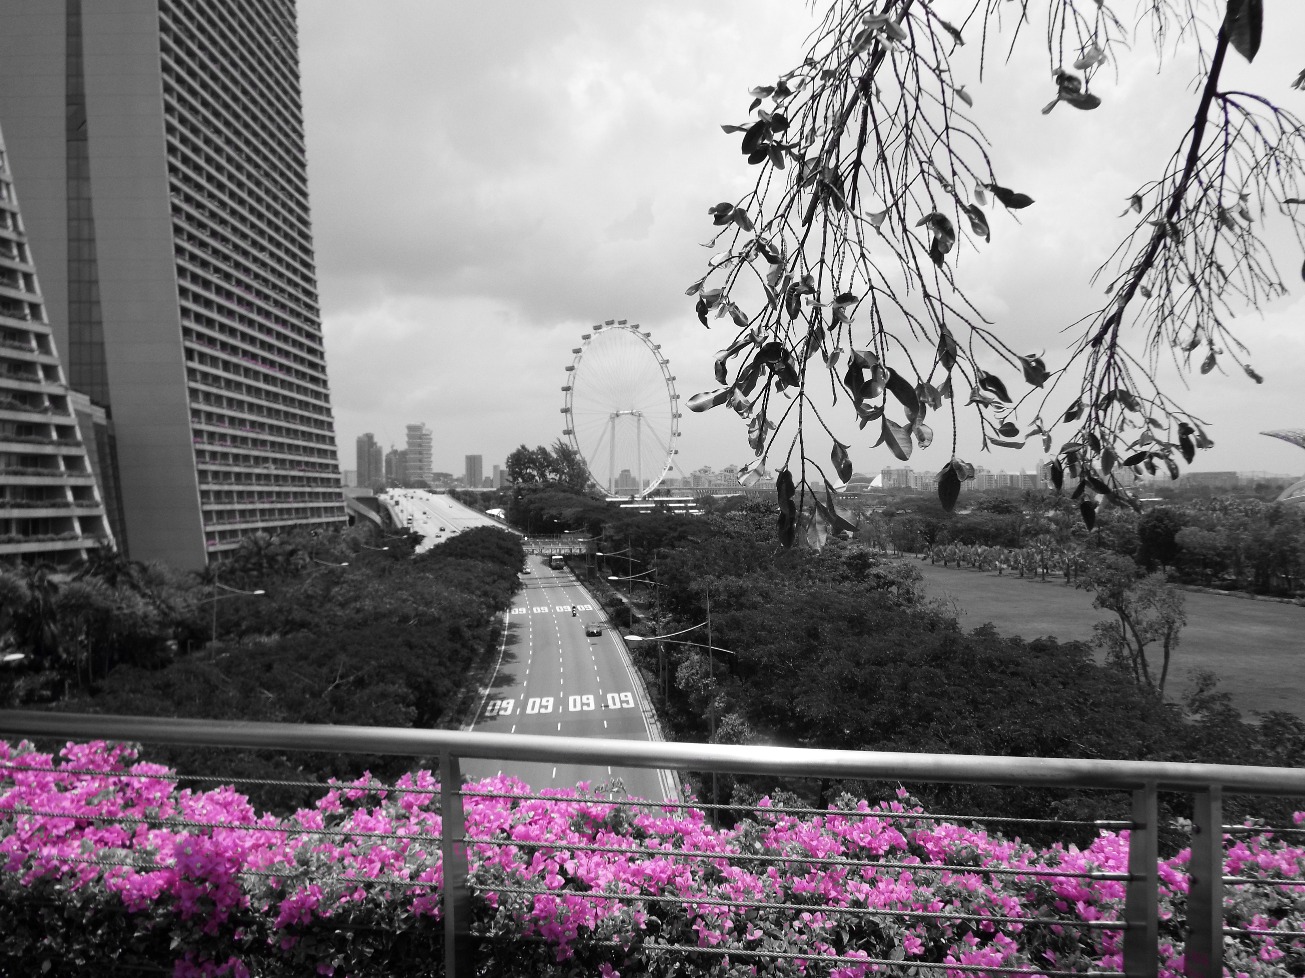 Blooms In Pink - Scenery, Scenery | Scent | Scented | City | Travel | Black and White | Black | Architecture | River | View | Road | Building | Tree